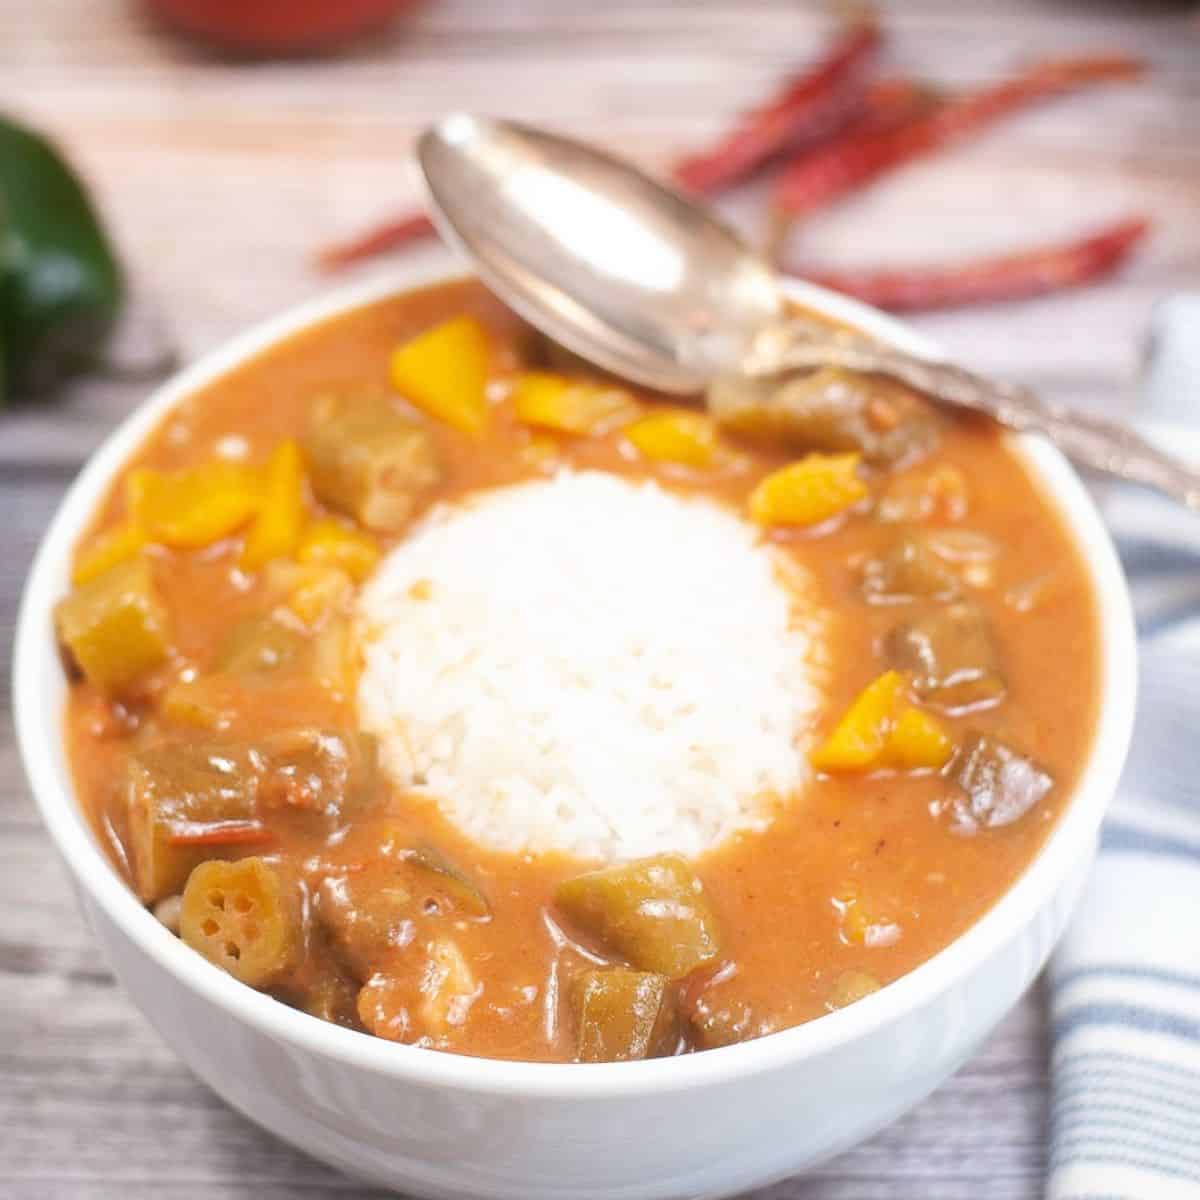 10 Minute Instant Pot Gumbo (Vegetarian), a simple and delicious version of the classic Creole and Cajun stew made without meat.